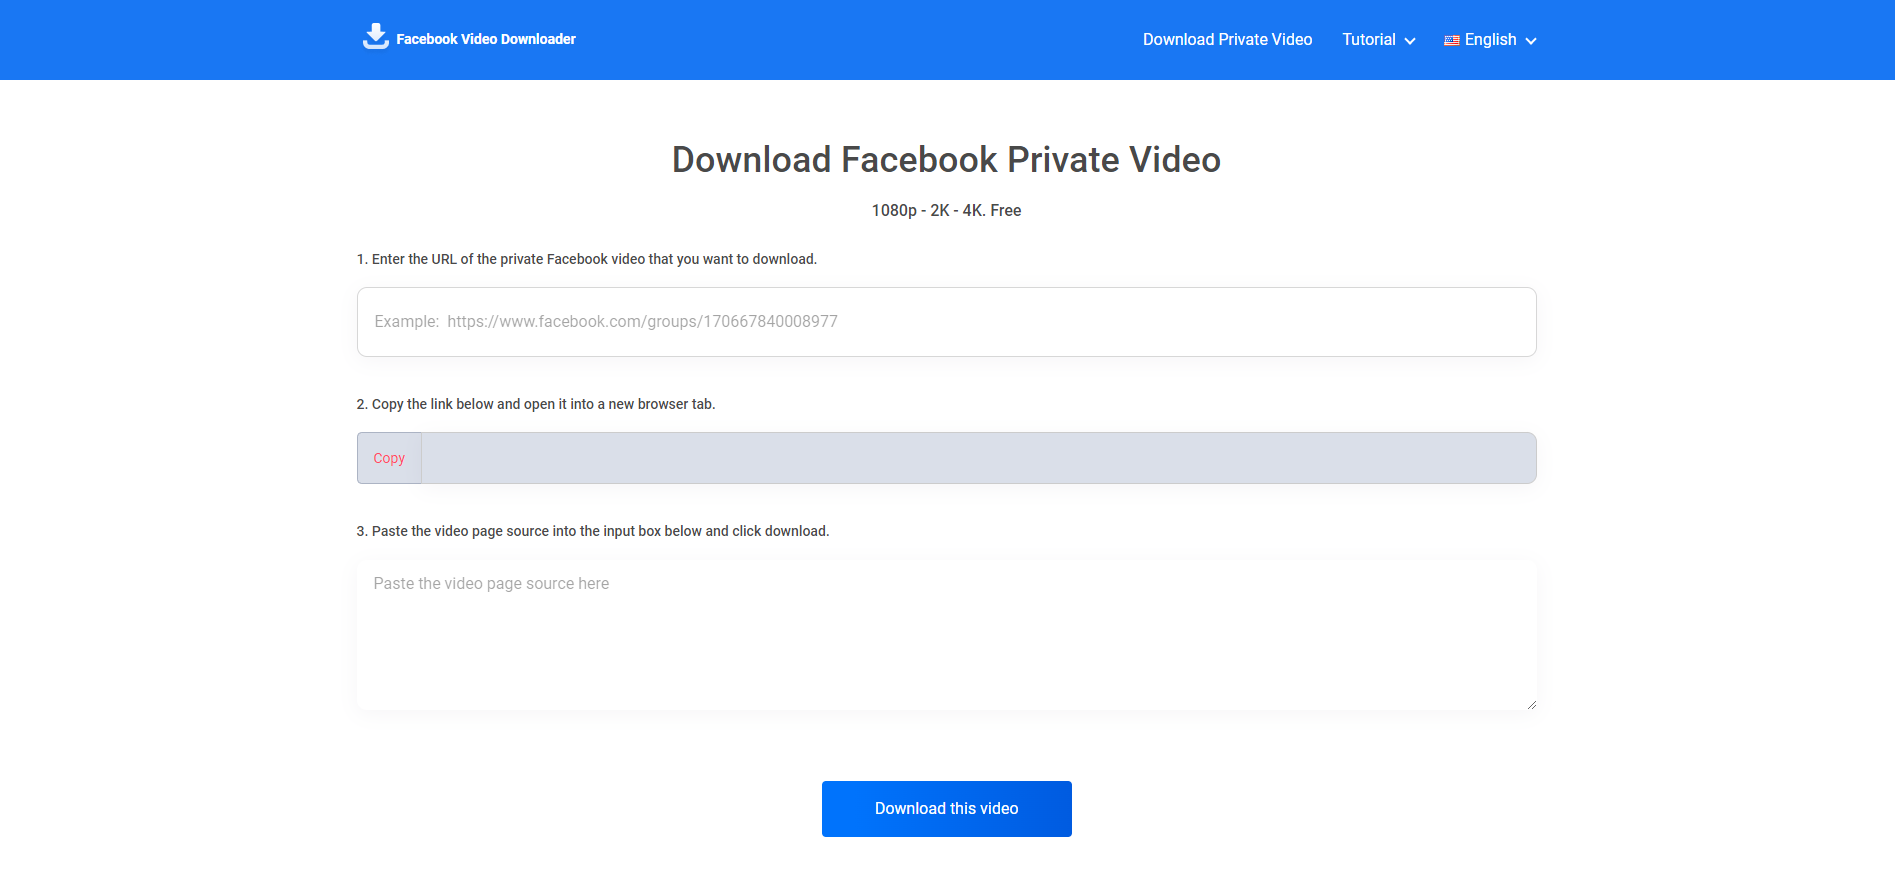 Why Should You Use Our Video Downloader for Facebook: Download Private Videos?)